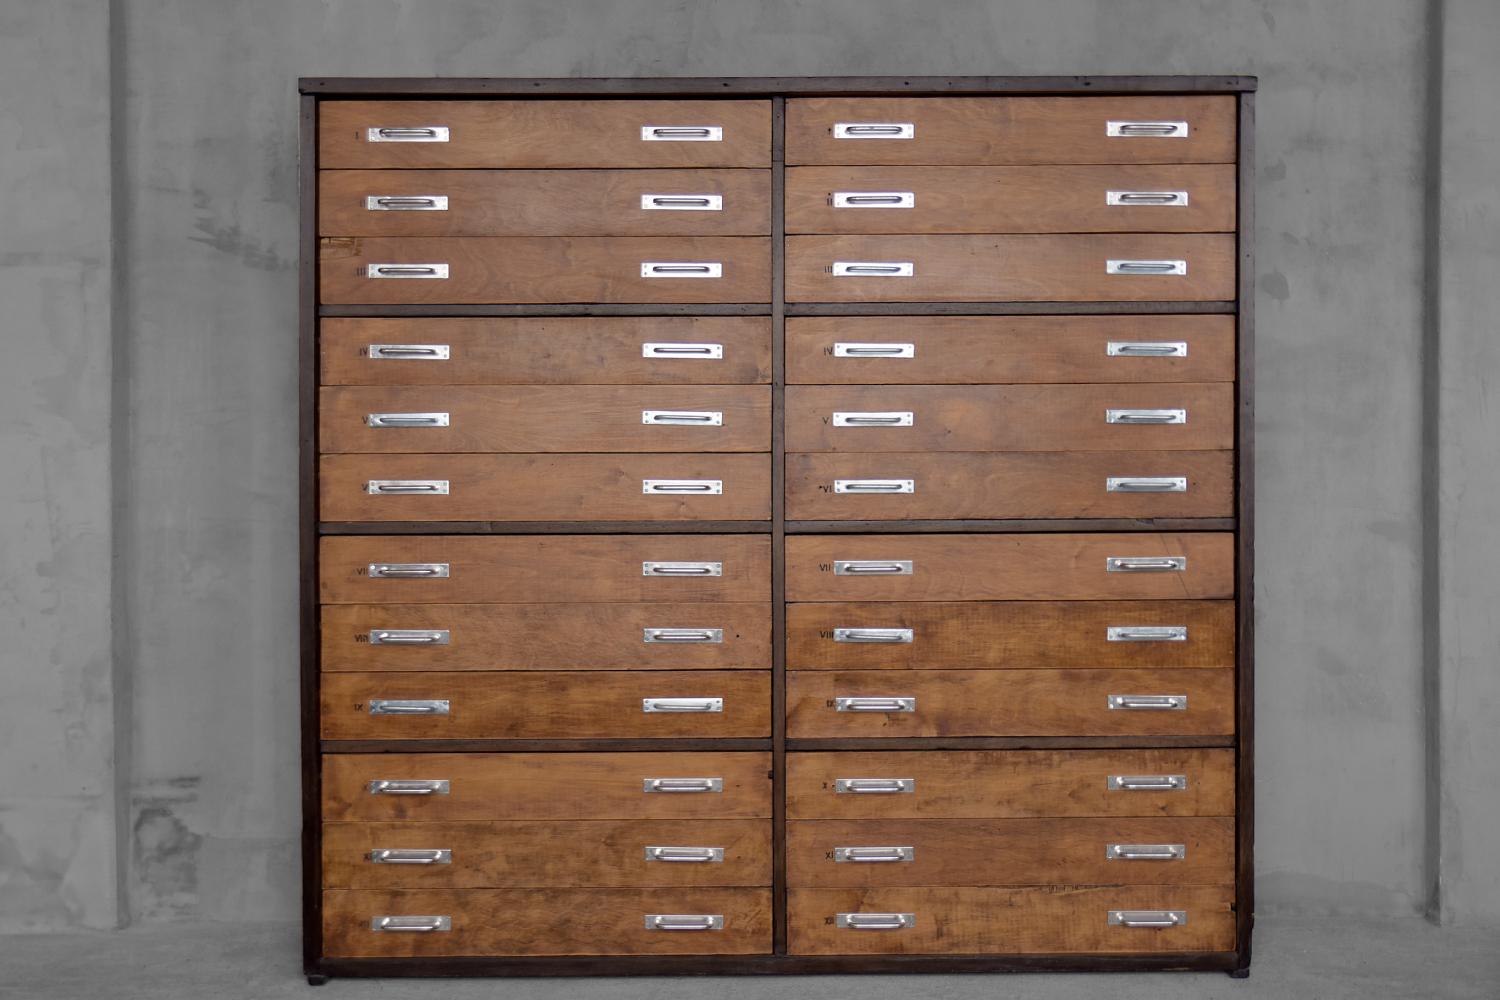 This huge drawer cabinet was manufactured in Austria during the 1930s. It is made of three kinds of wood: oak, elm and hornbeam. Oak wood is considered a royal material for a reason - even after several centuries, furniture made of oak looks like